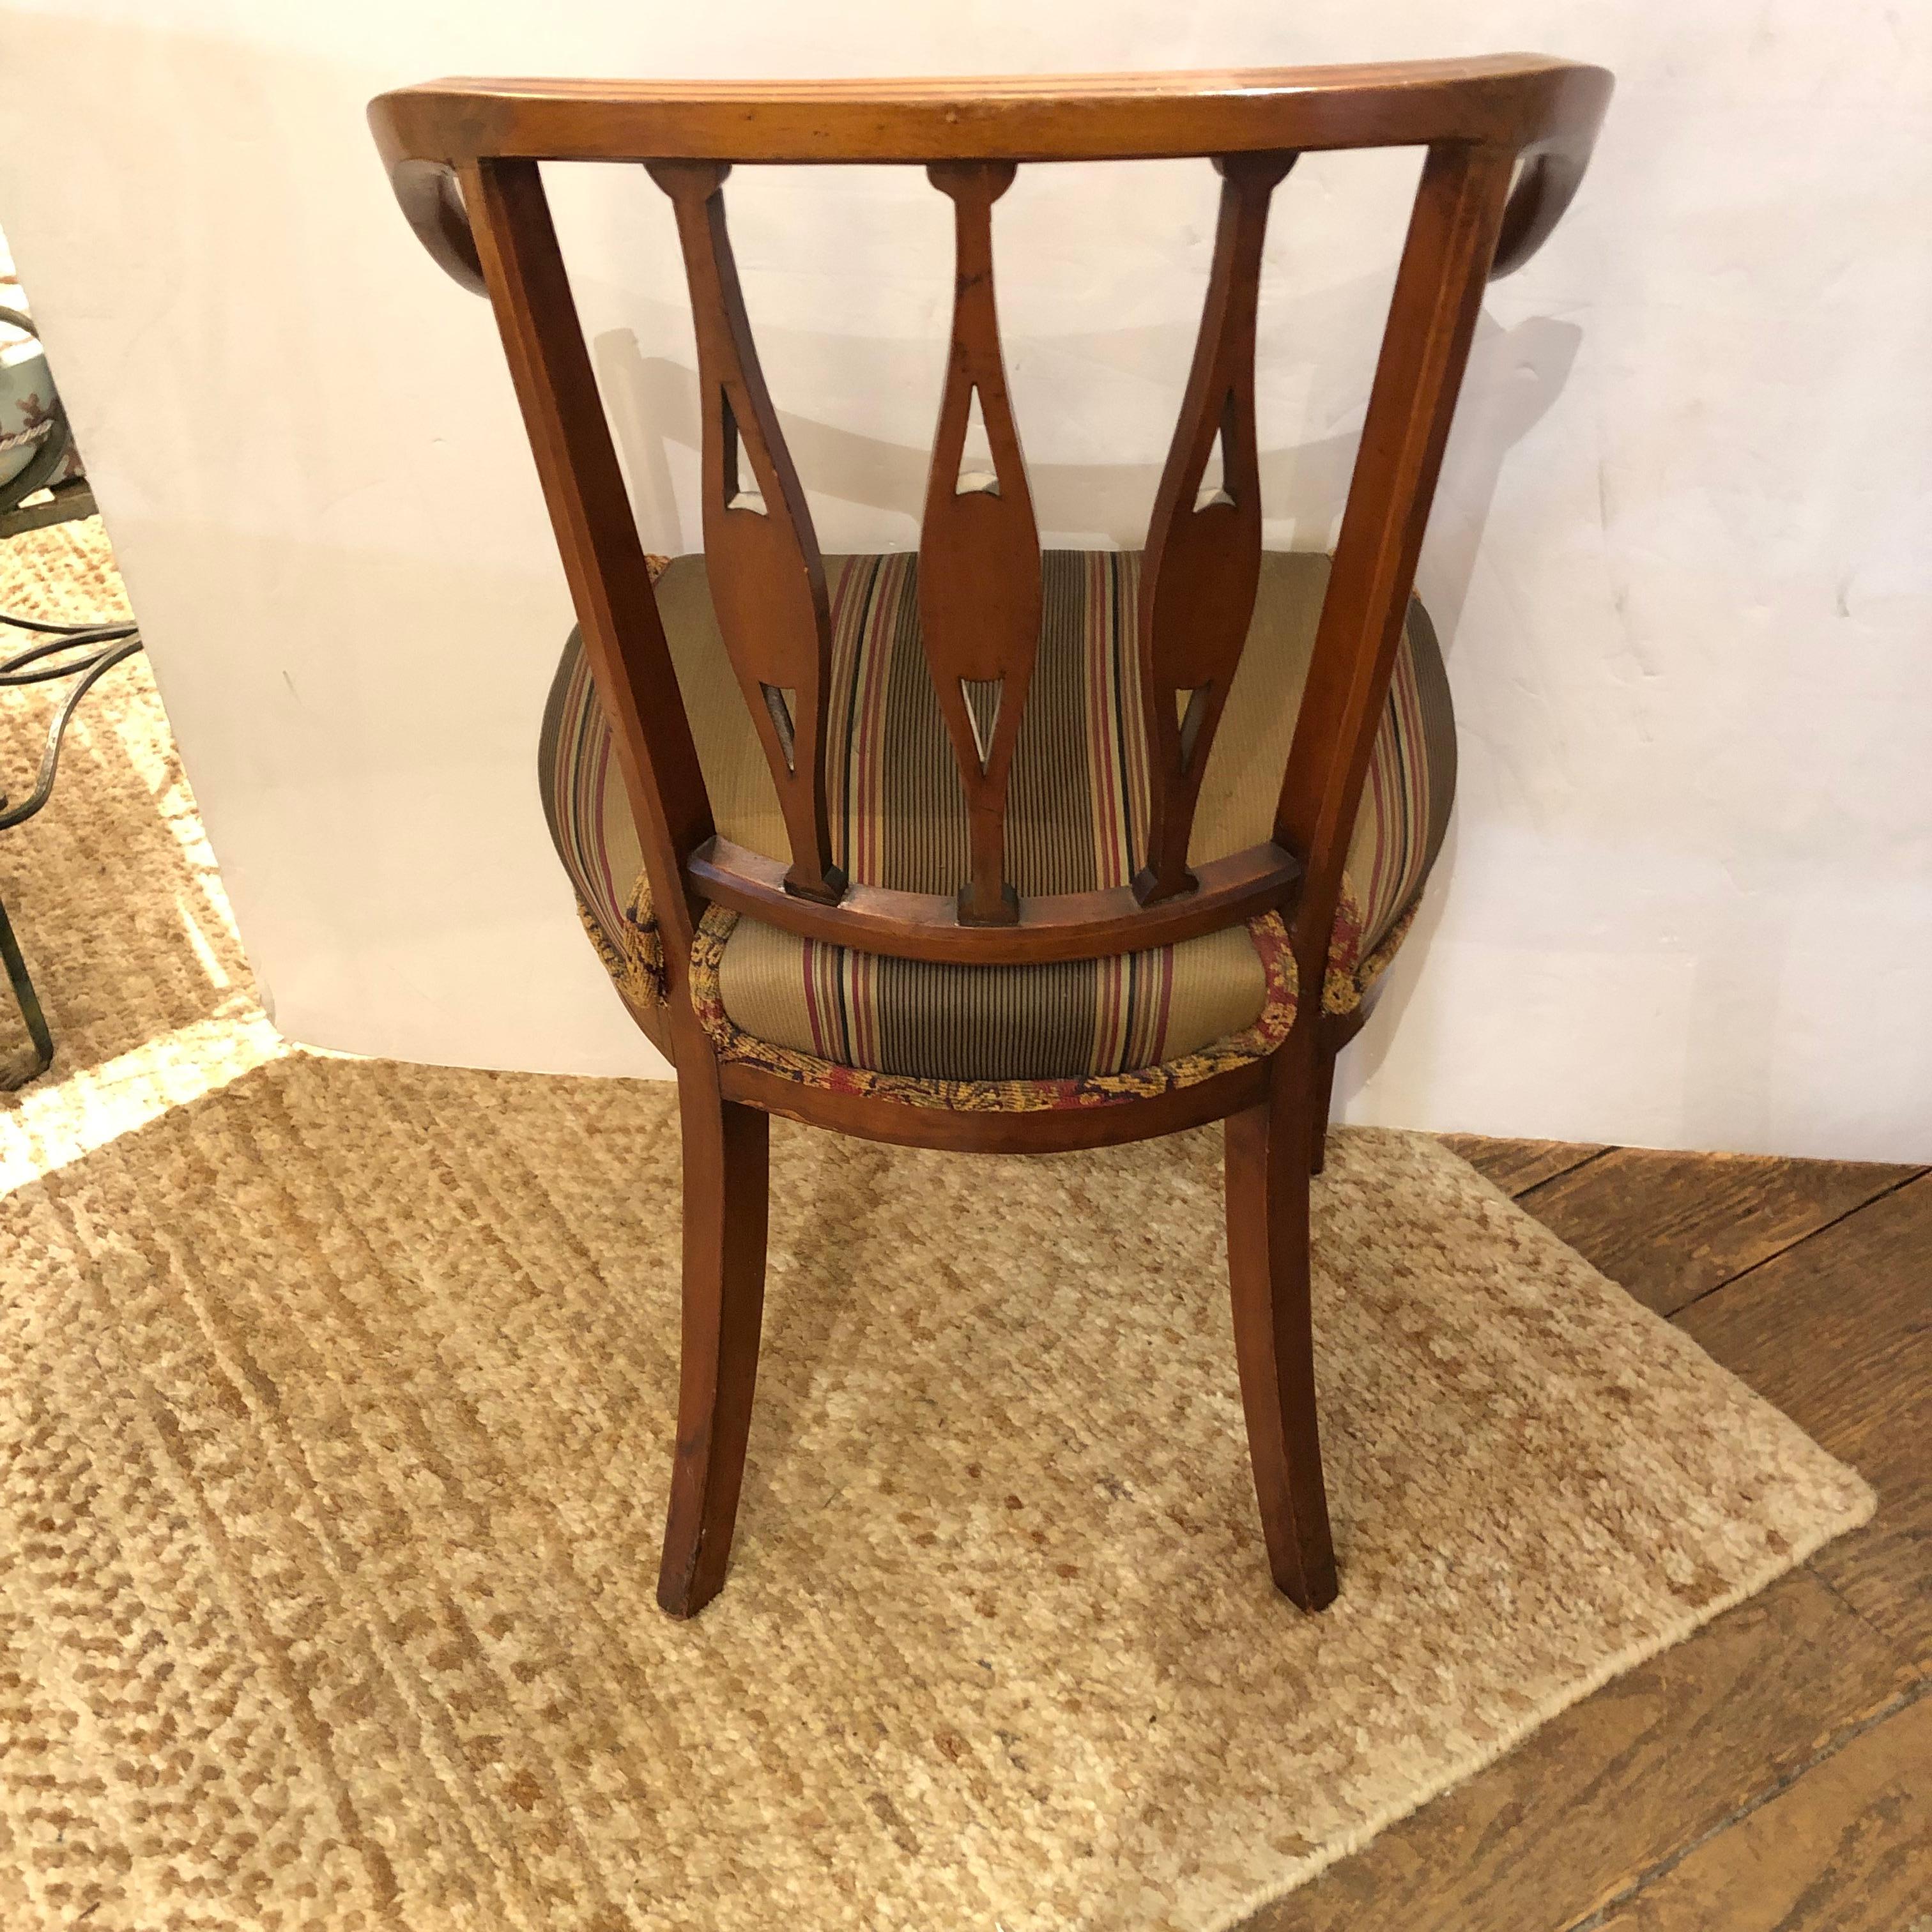 Lovely Curved French Fruitwood Inlaid Salon or Desk Chair For Sale 3